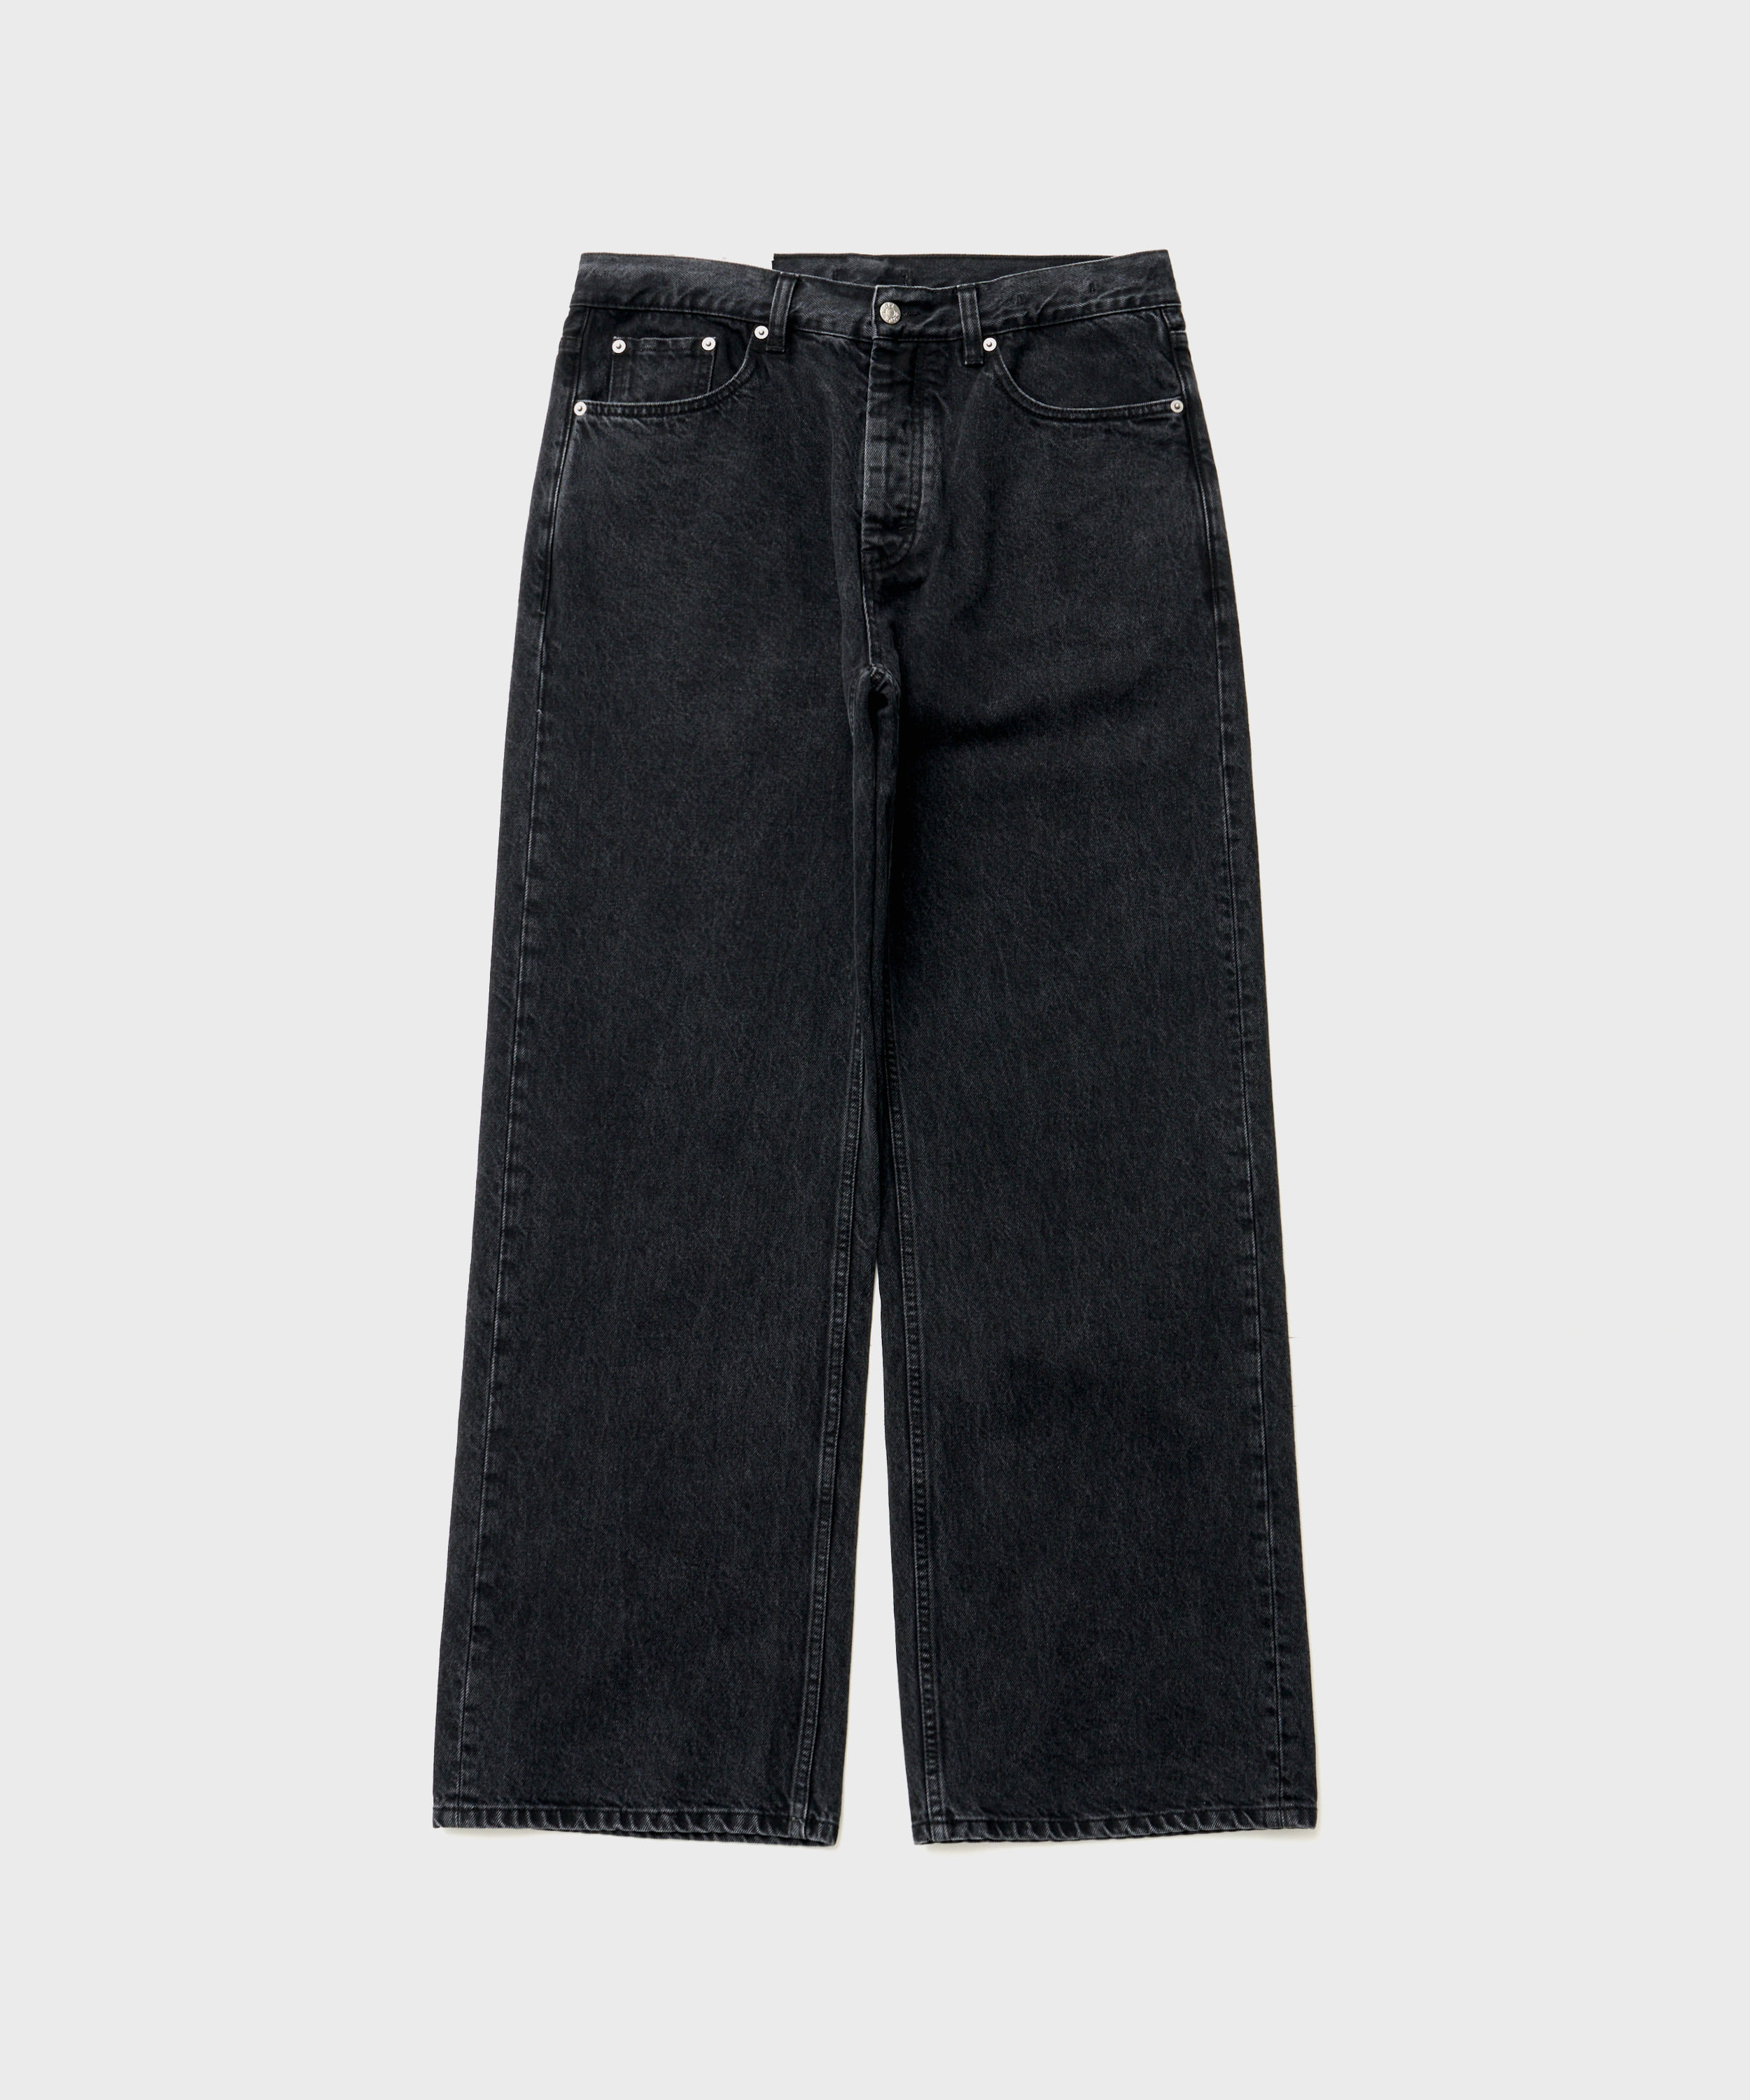 (w) Criss Jeans (Washed Black)